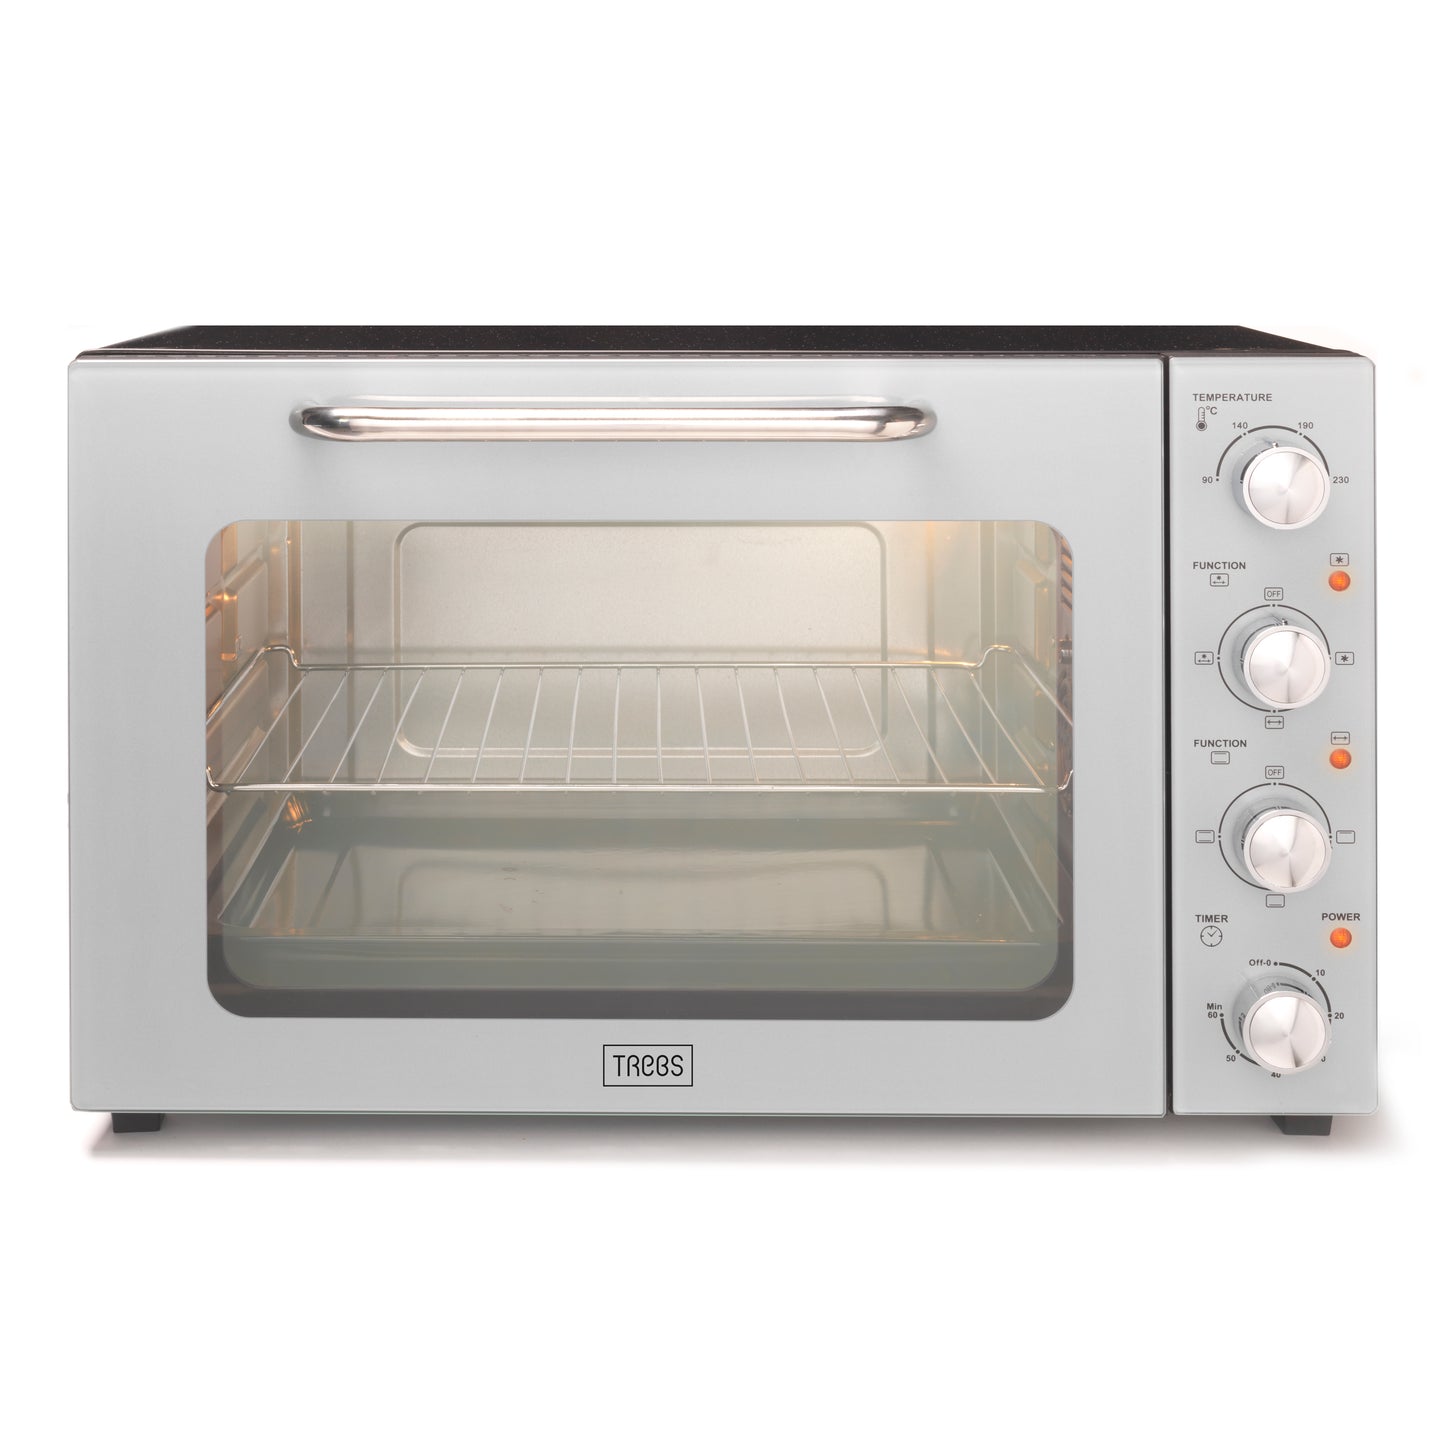 Trebs 99393 - Electric Oven - Grey